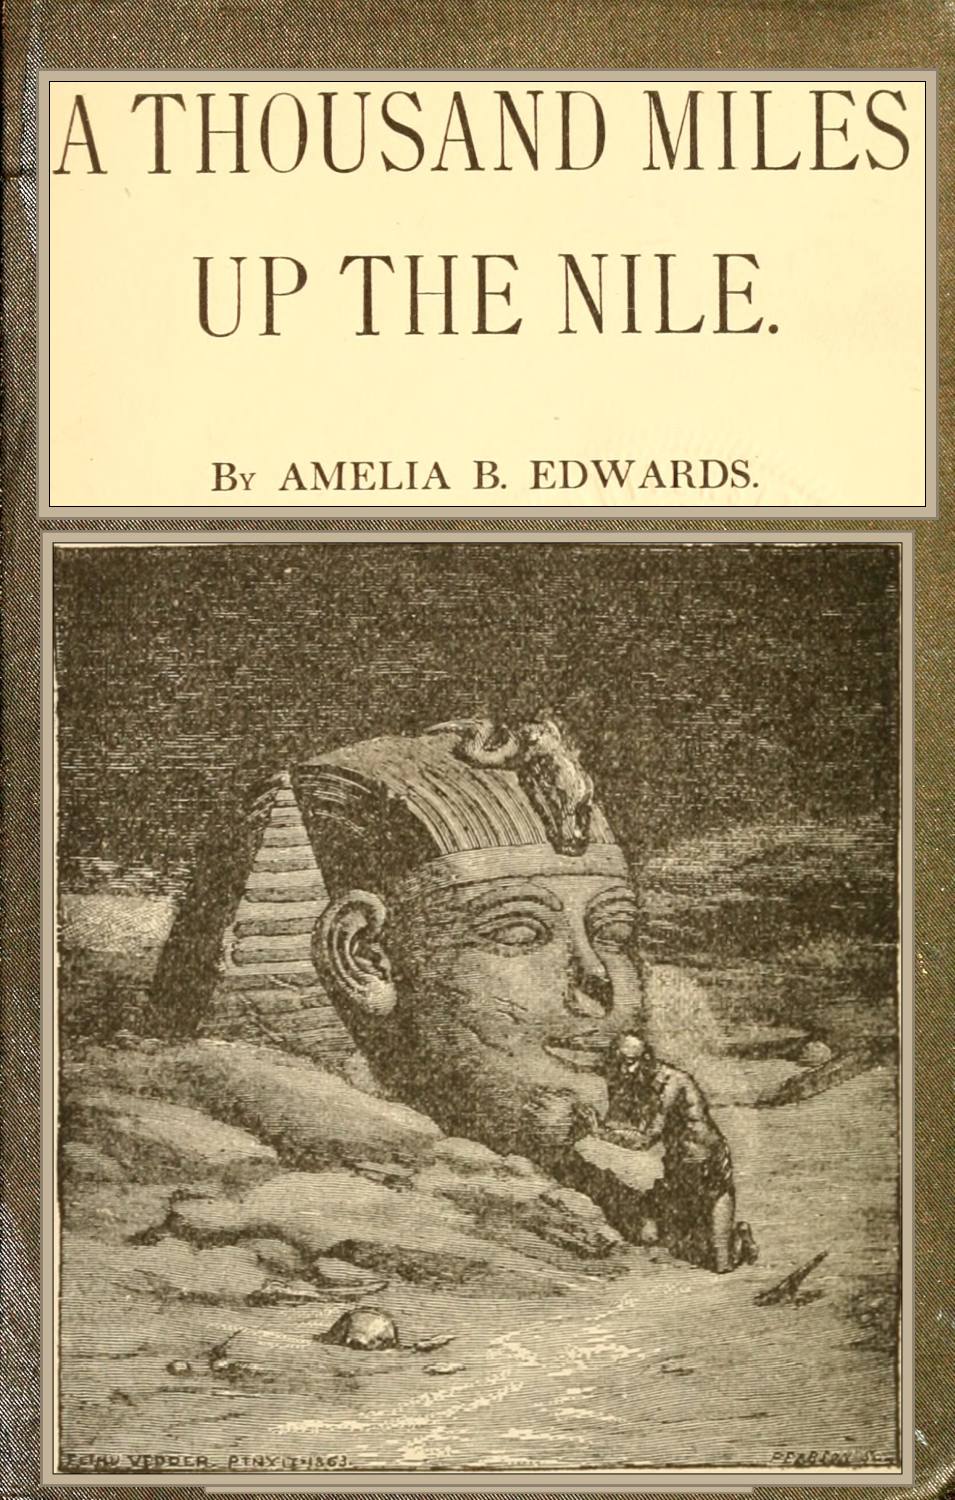 The Project Gutenberg eBook of A thousand miles up the Nile, by Amelia B.  Edwards.